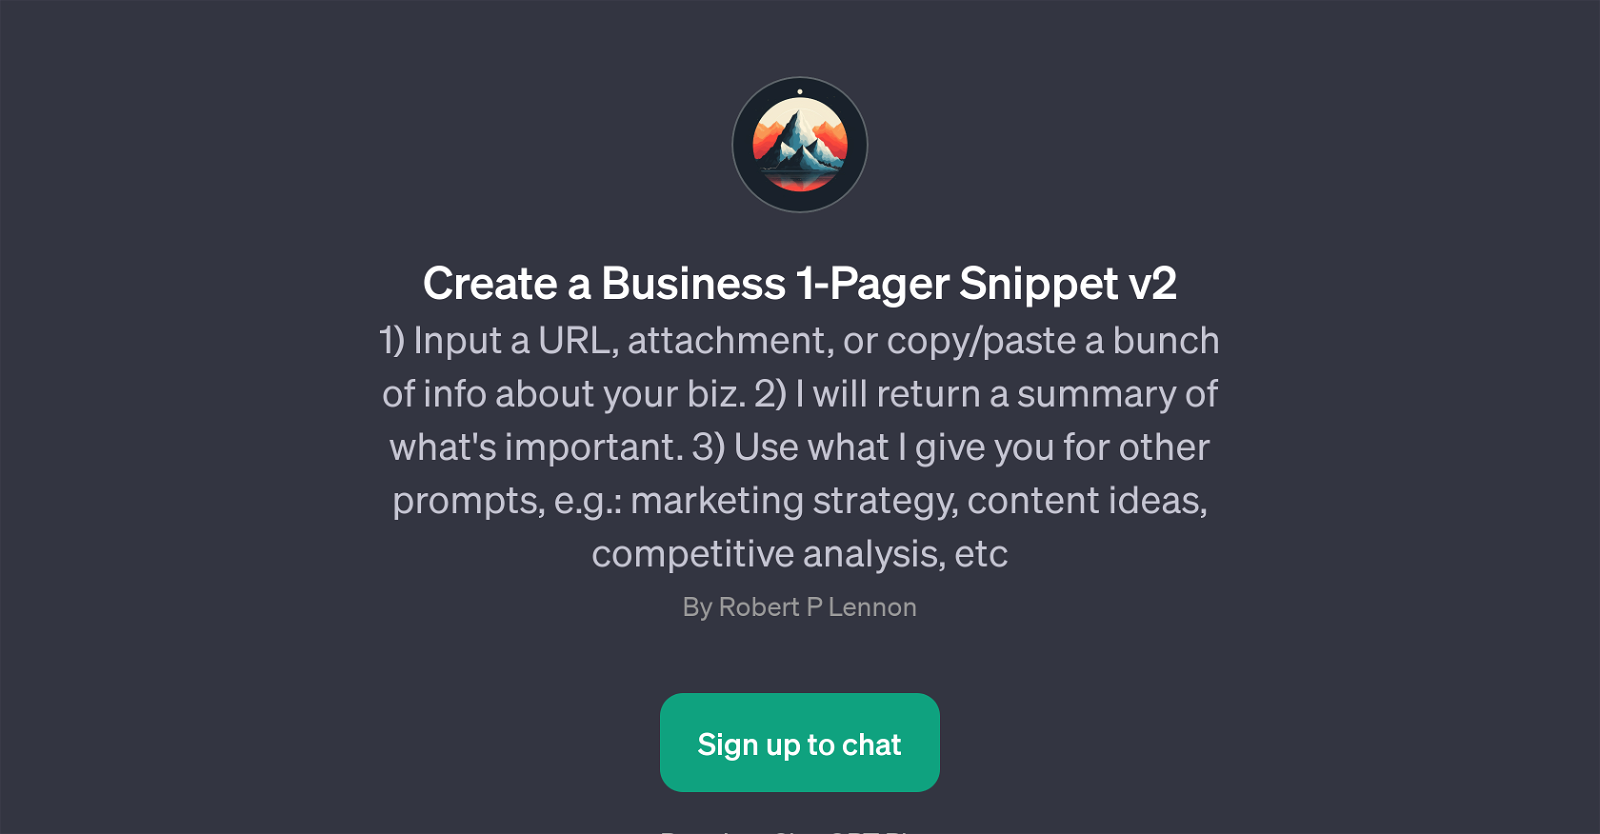 Create a Business 1-Pager Snippet v2 website